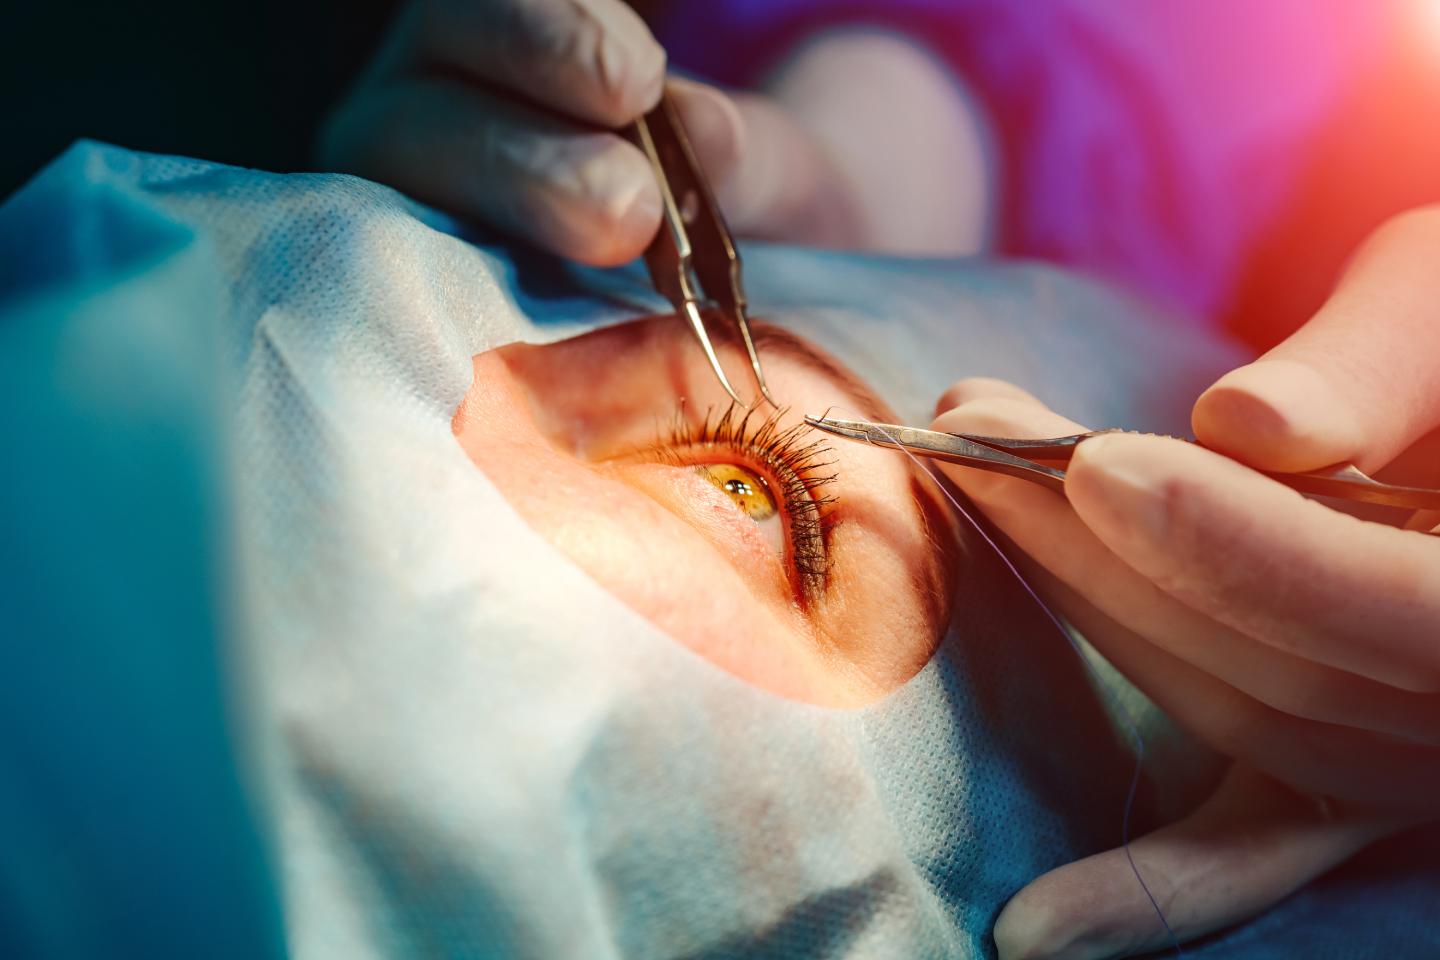 CATARACT- Its causes, symptoms, prevention, diagnosis, and treatment